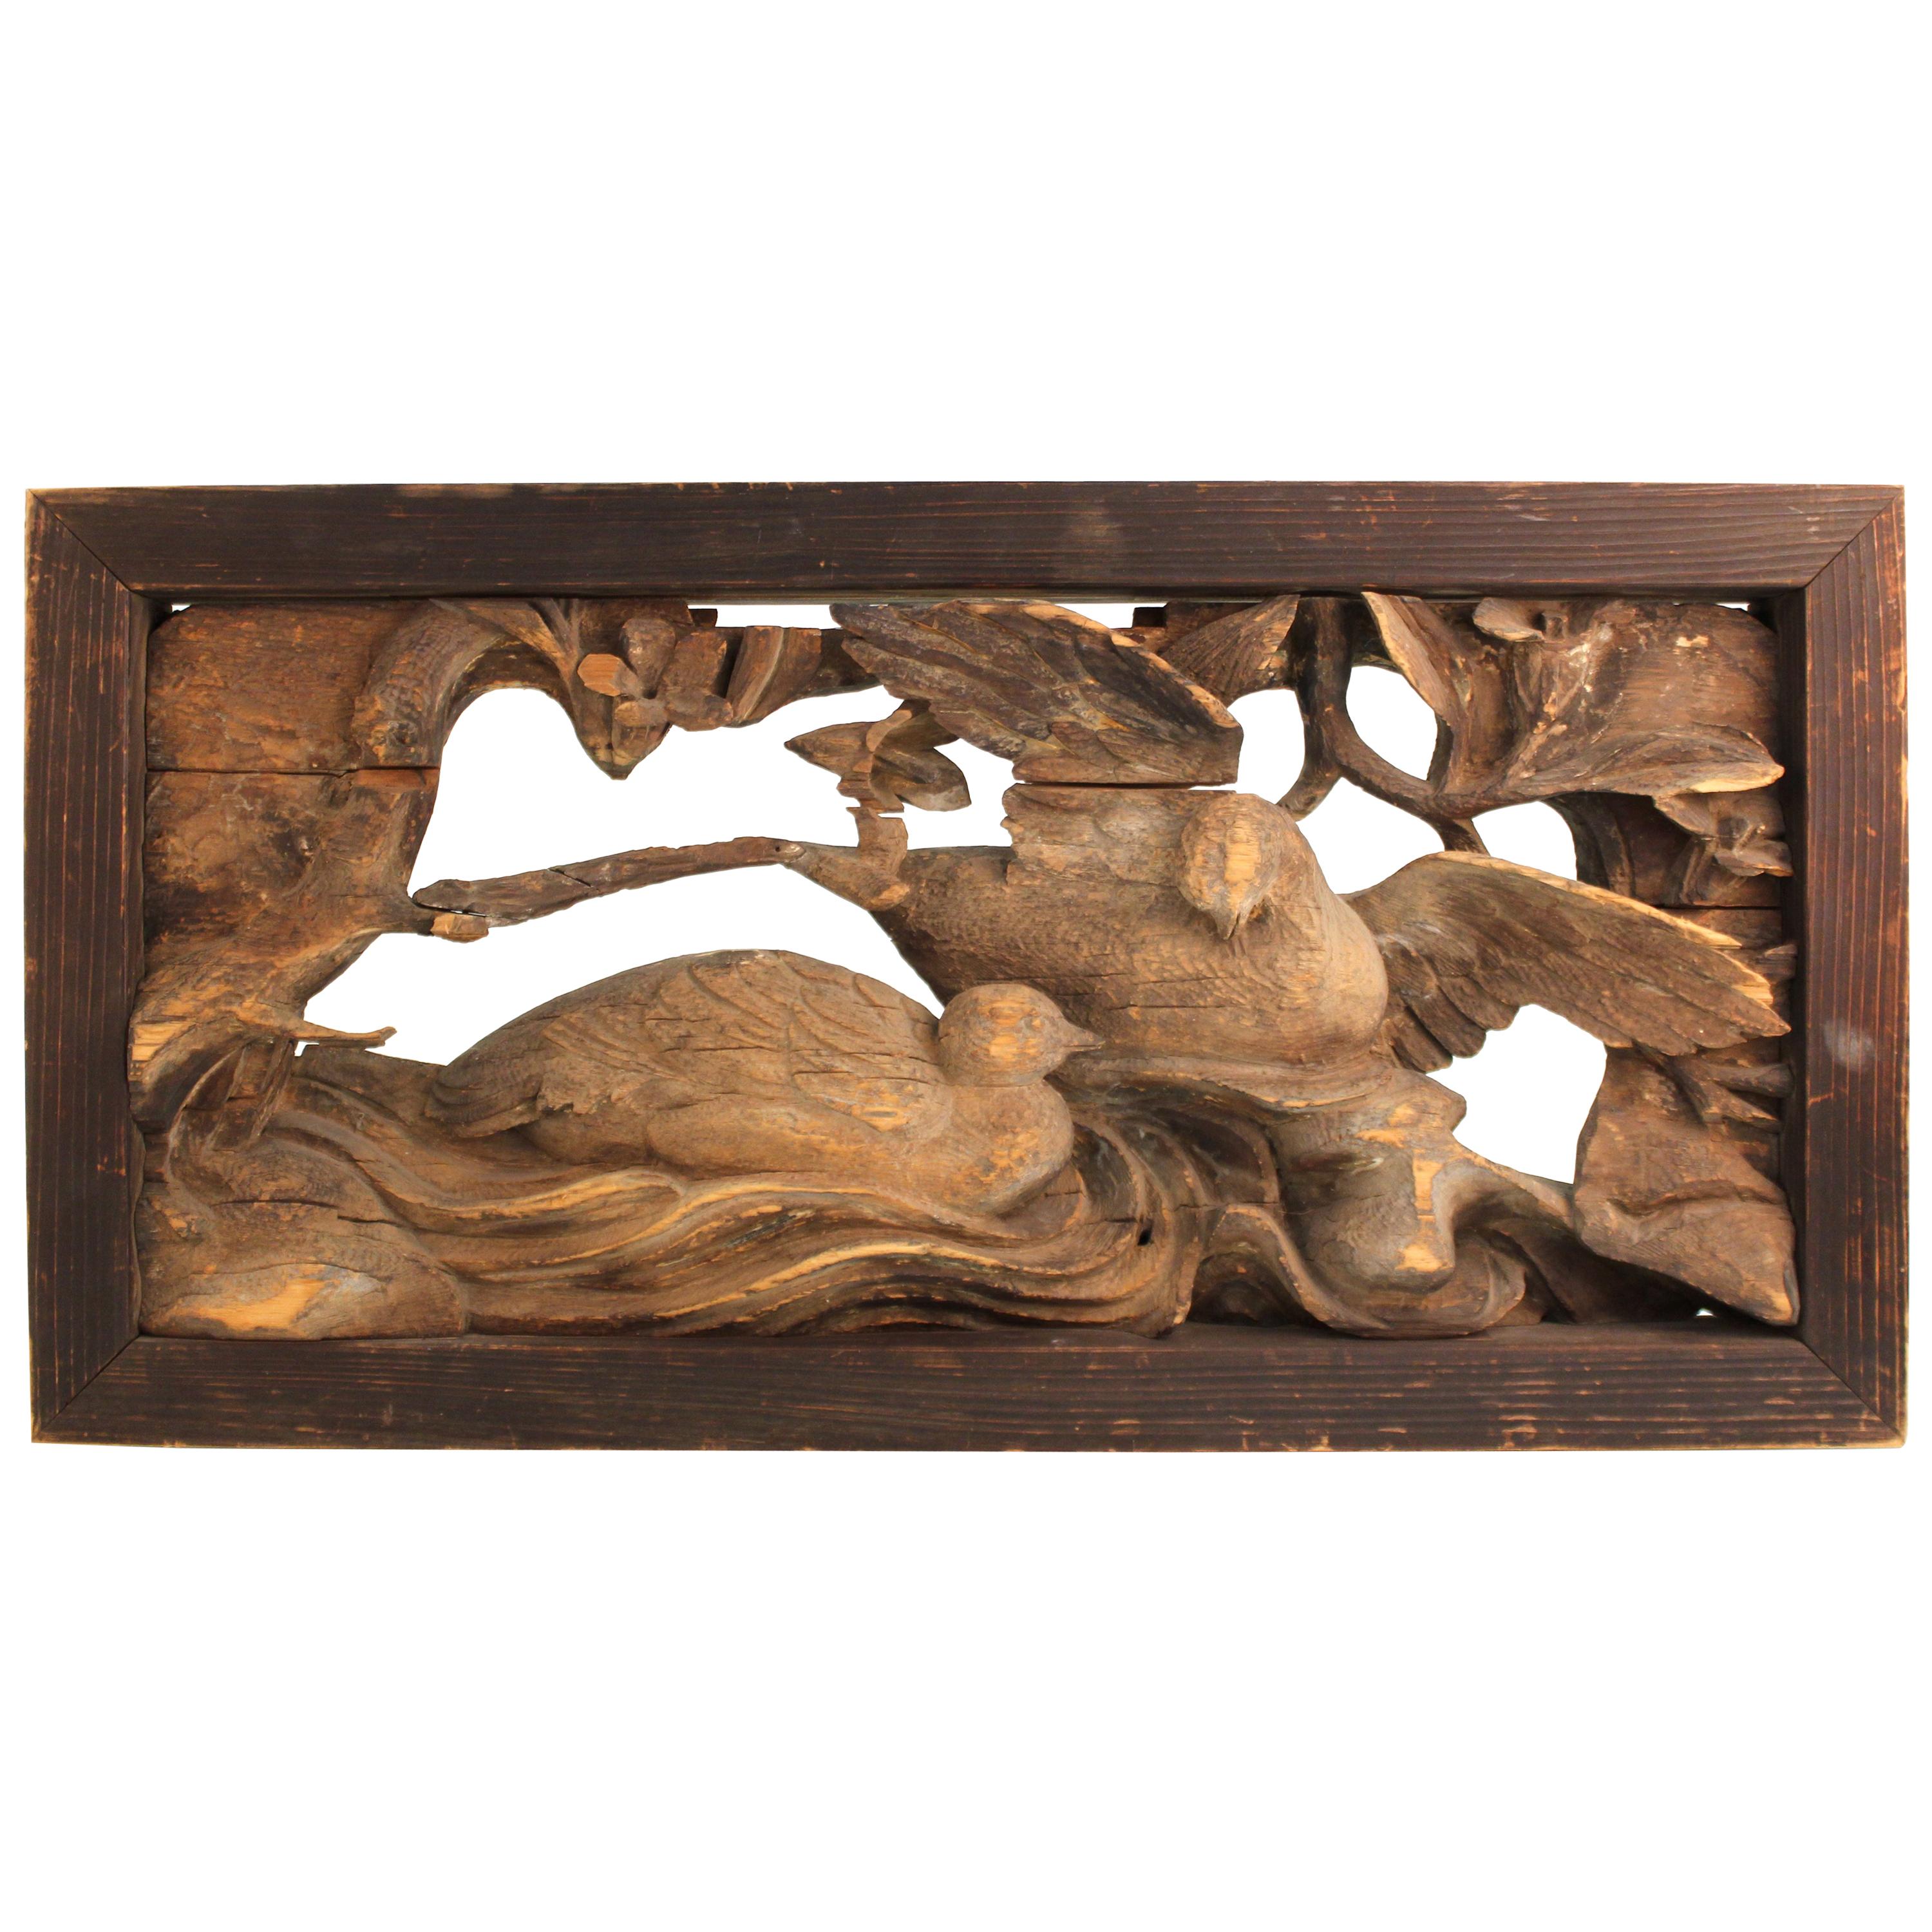 Japanese Edo Period Wood Temple Carving with Doves